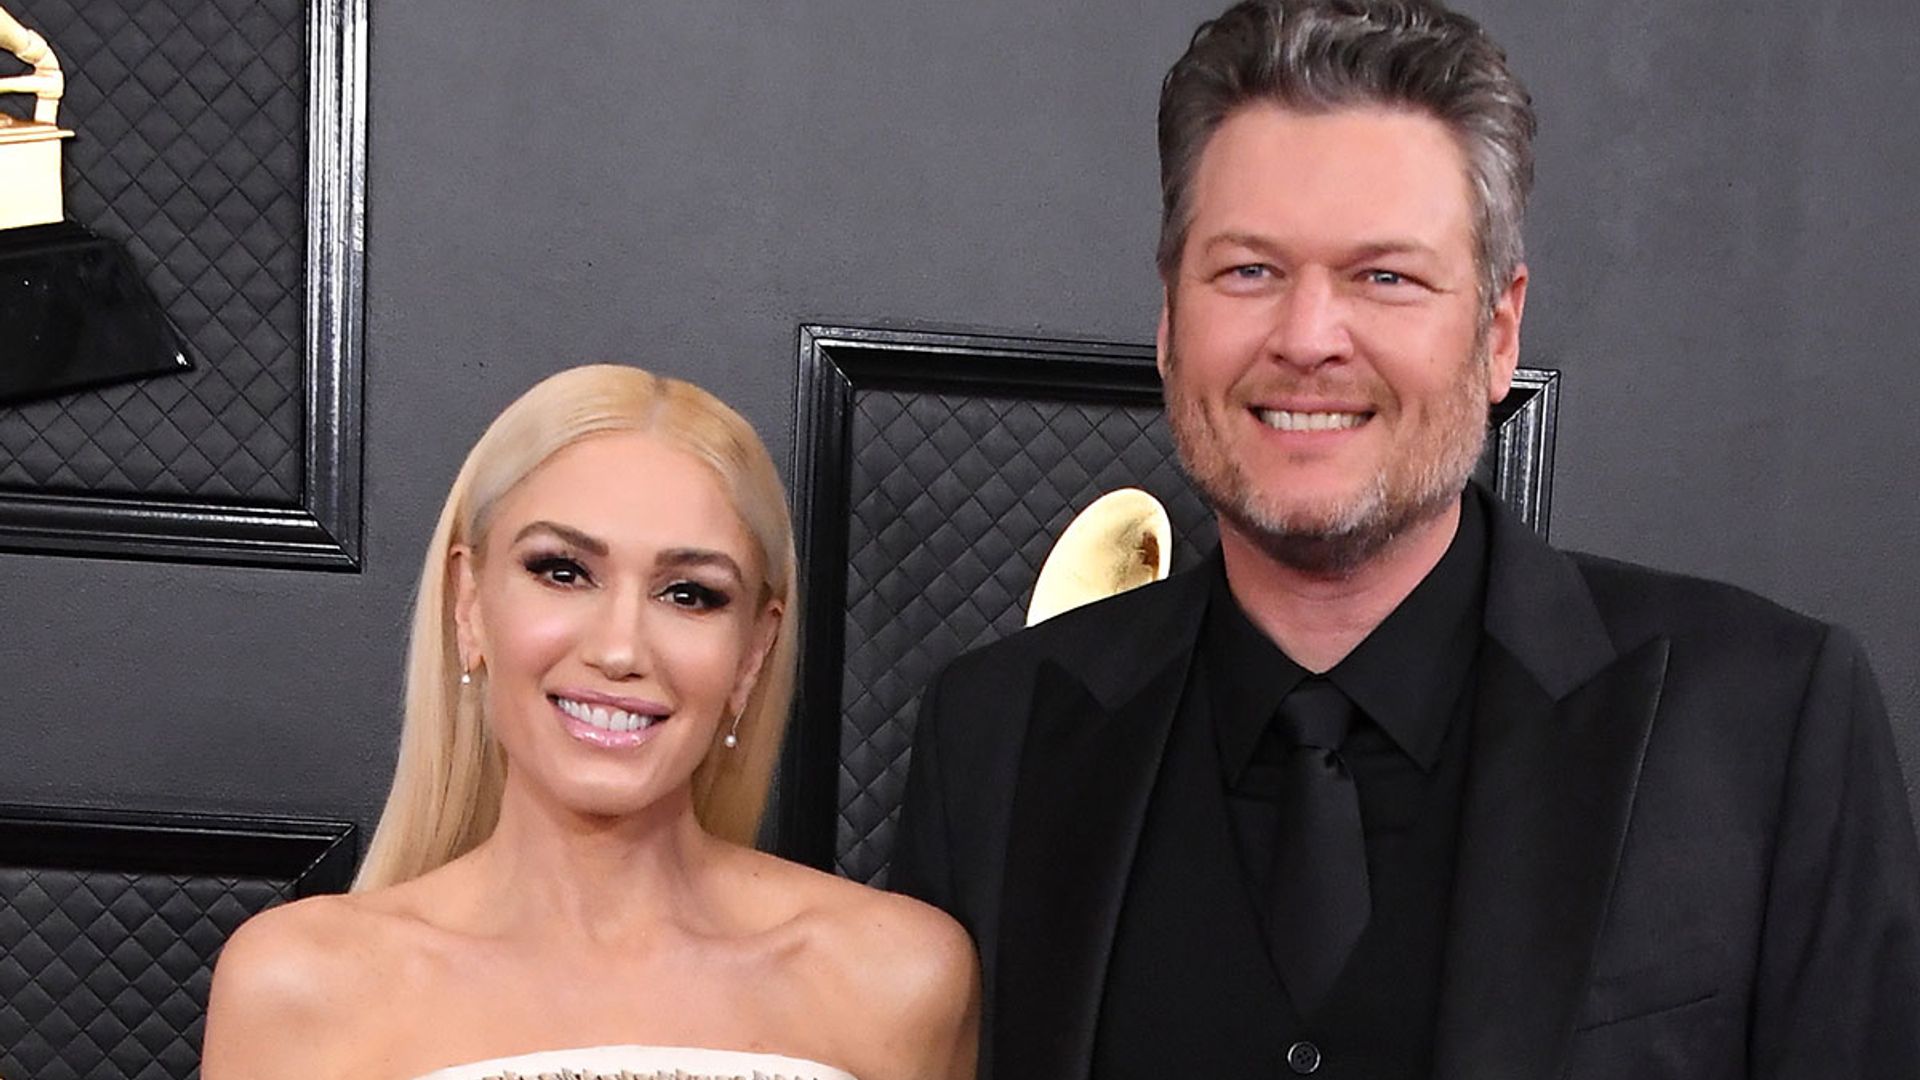 Gwen Stefani and Blake Shelton's awkward blind date: best Twitter reactions over hilarious Super Bowl ad